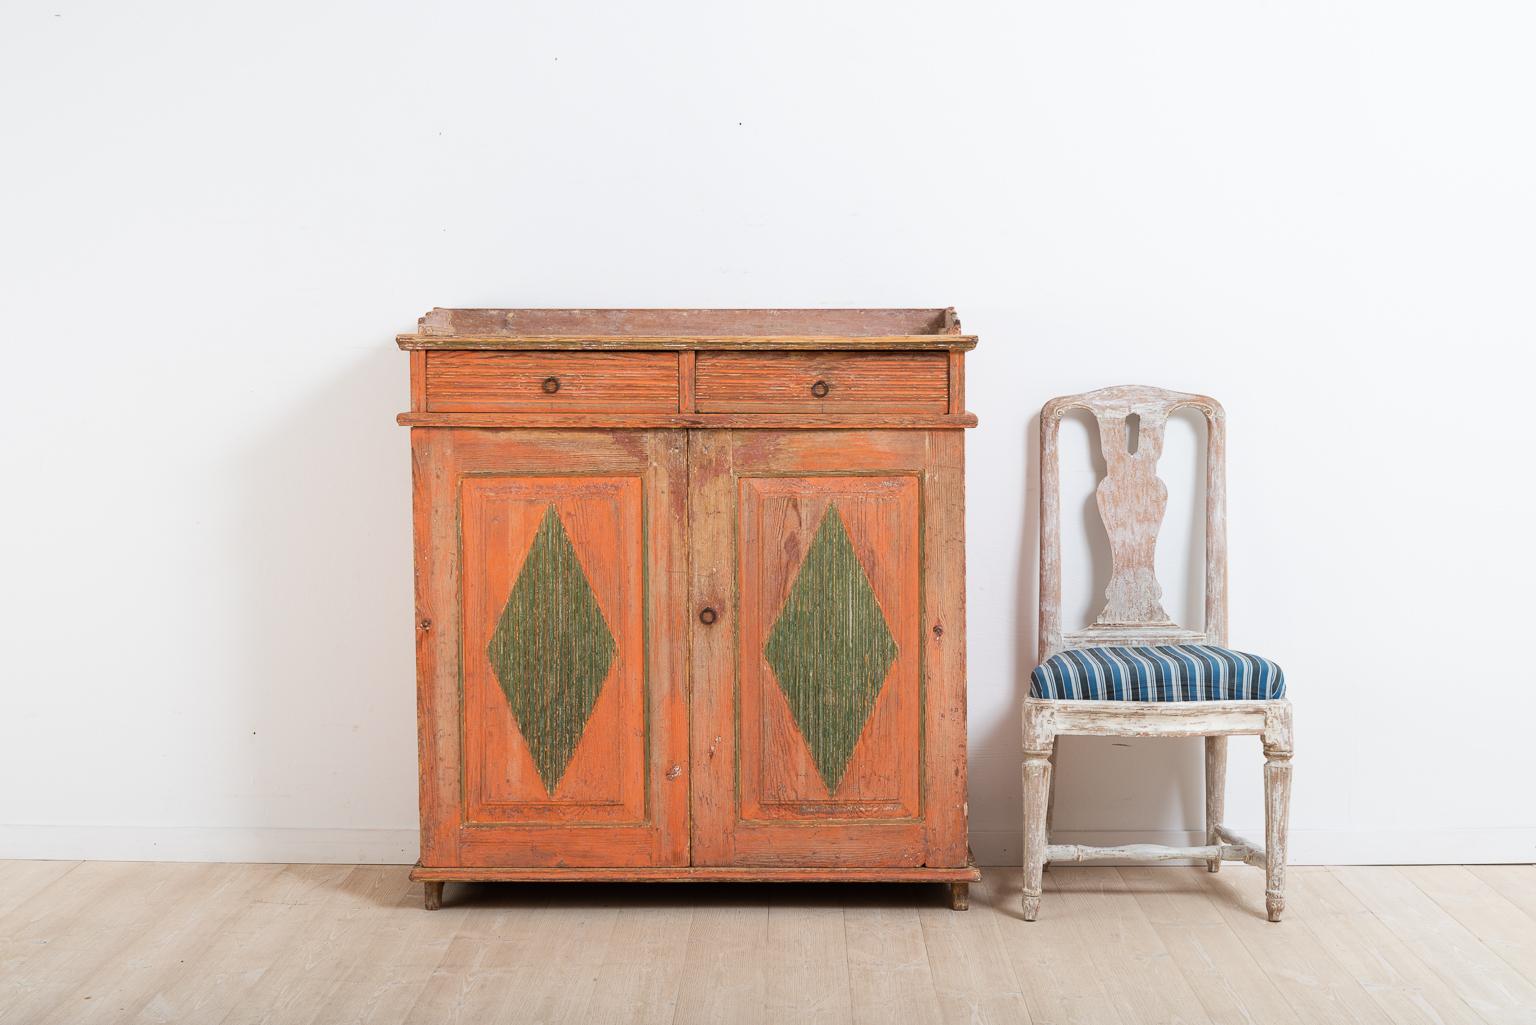 Swedish Gustavian sideboard dry scraped to original paint. The sideboard has decorative diamonds on the doors, painted green for additional contrast. The hinges are newer and were most likely changed during the mid-19th century. The sideboard was